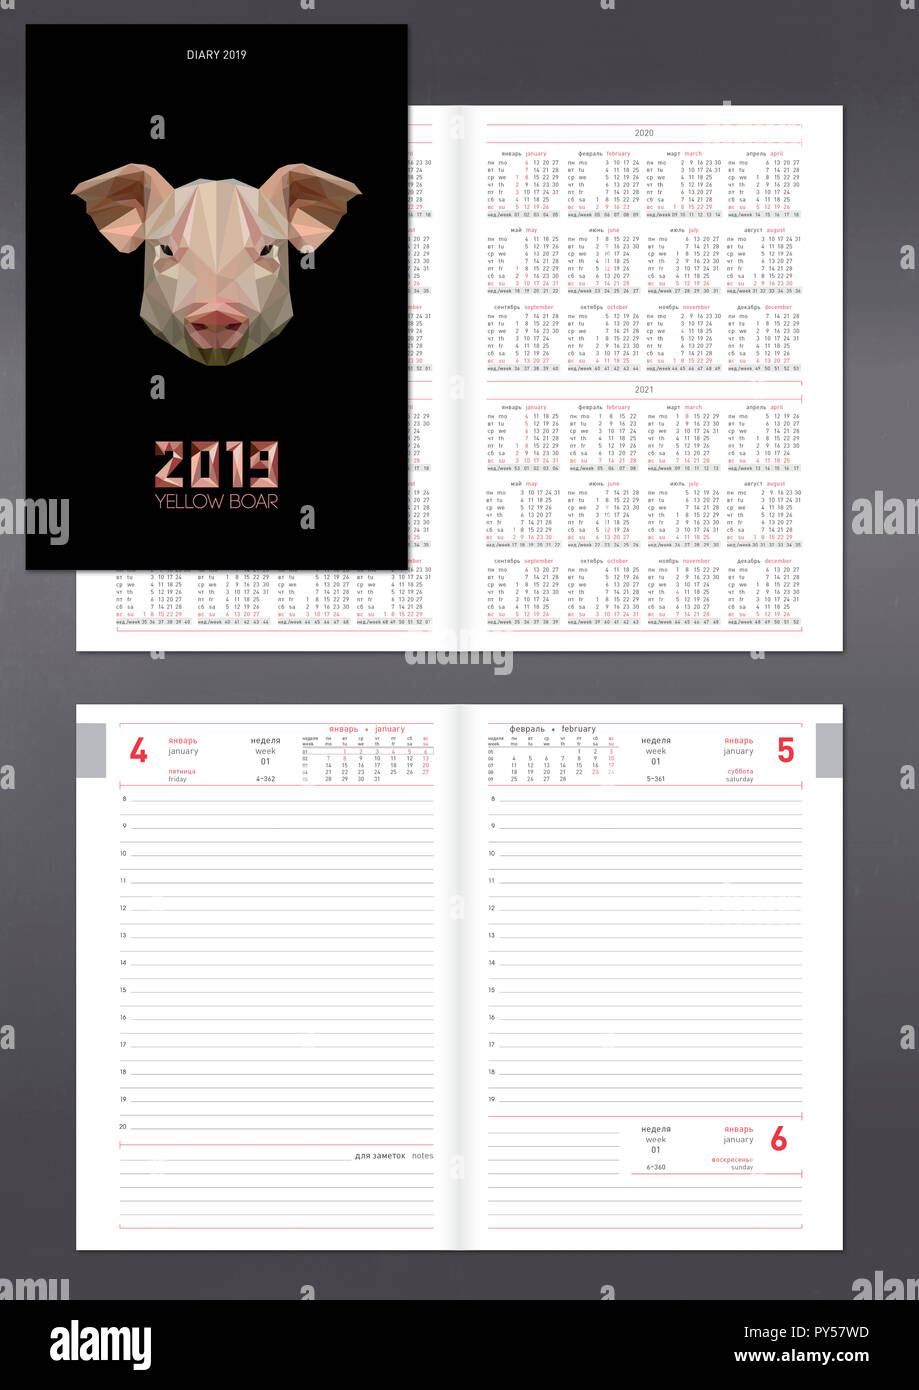 Template for layout of daily planner for 2019 year with pig. Design office book with page templates, personal data and calendar data on 2018, 2019 Stock Photo